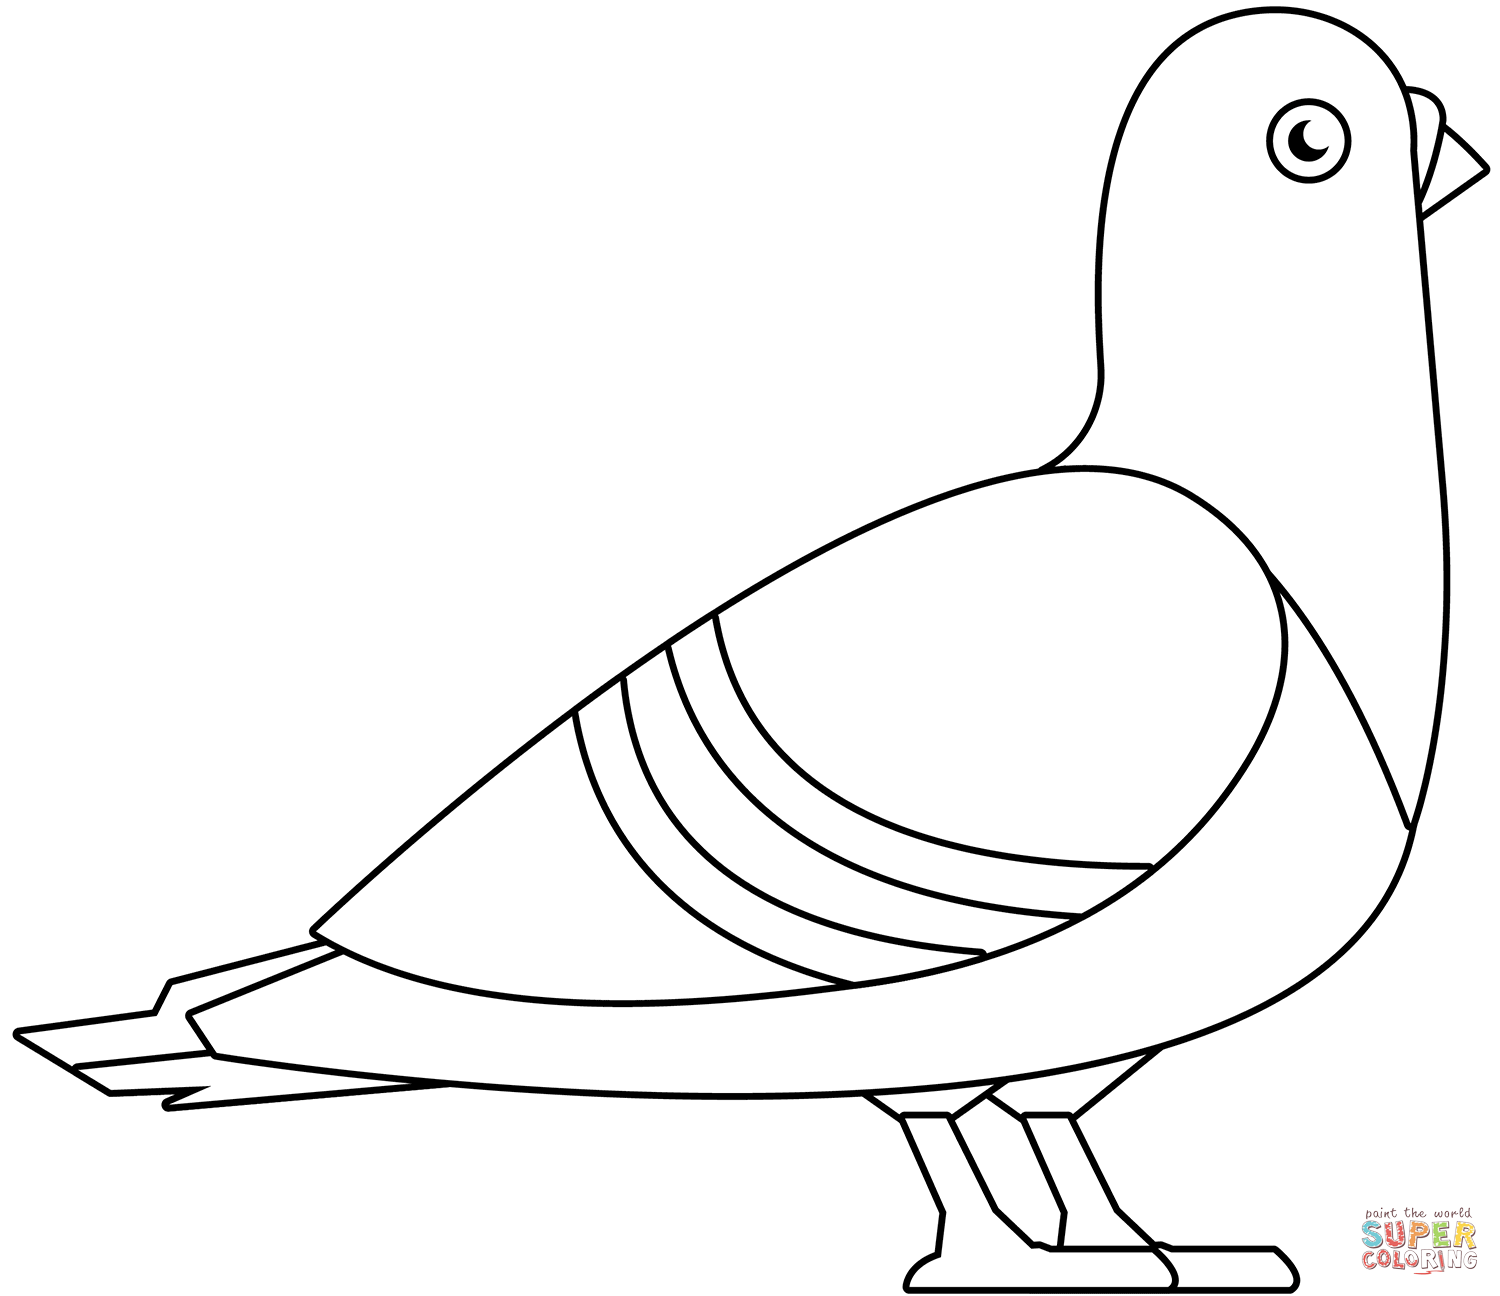 Pigeon coloring page free printable coloring pages